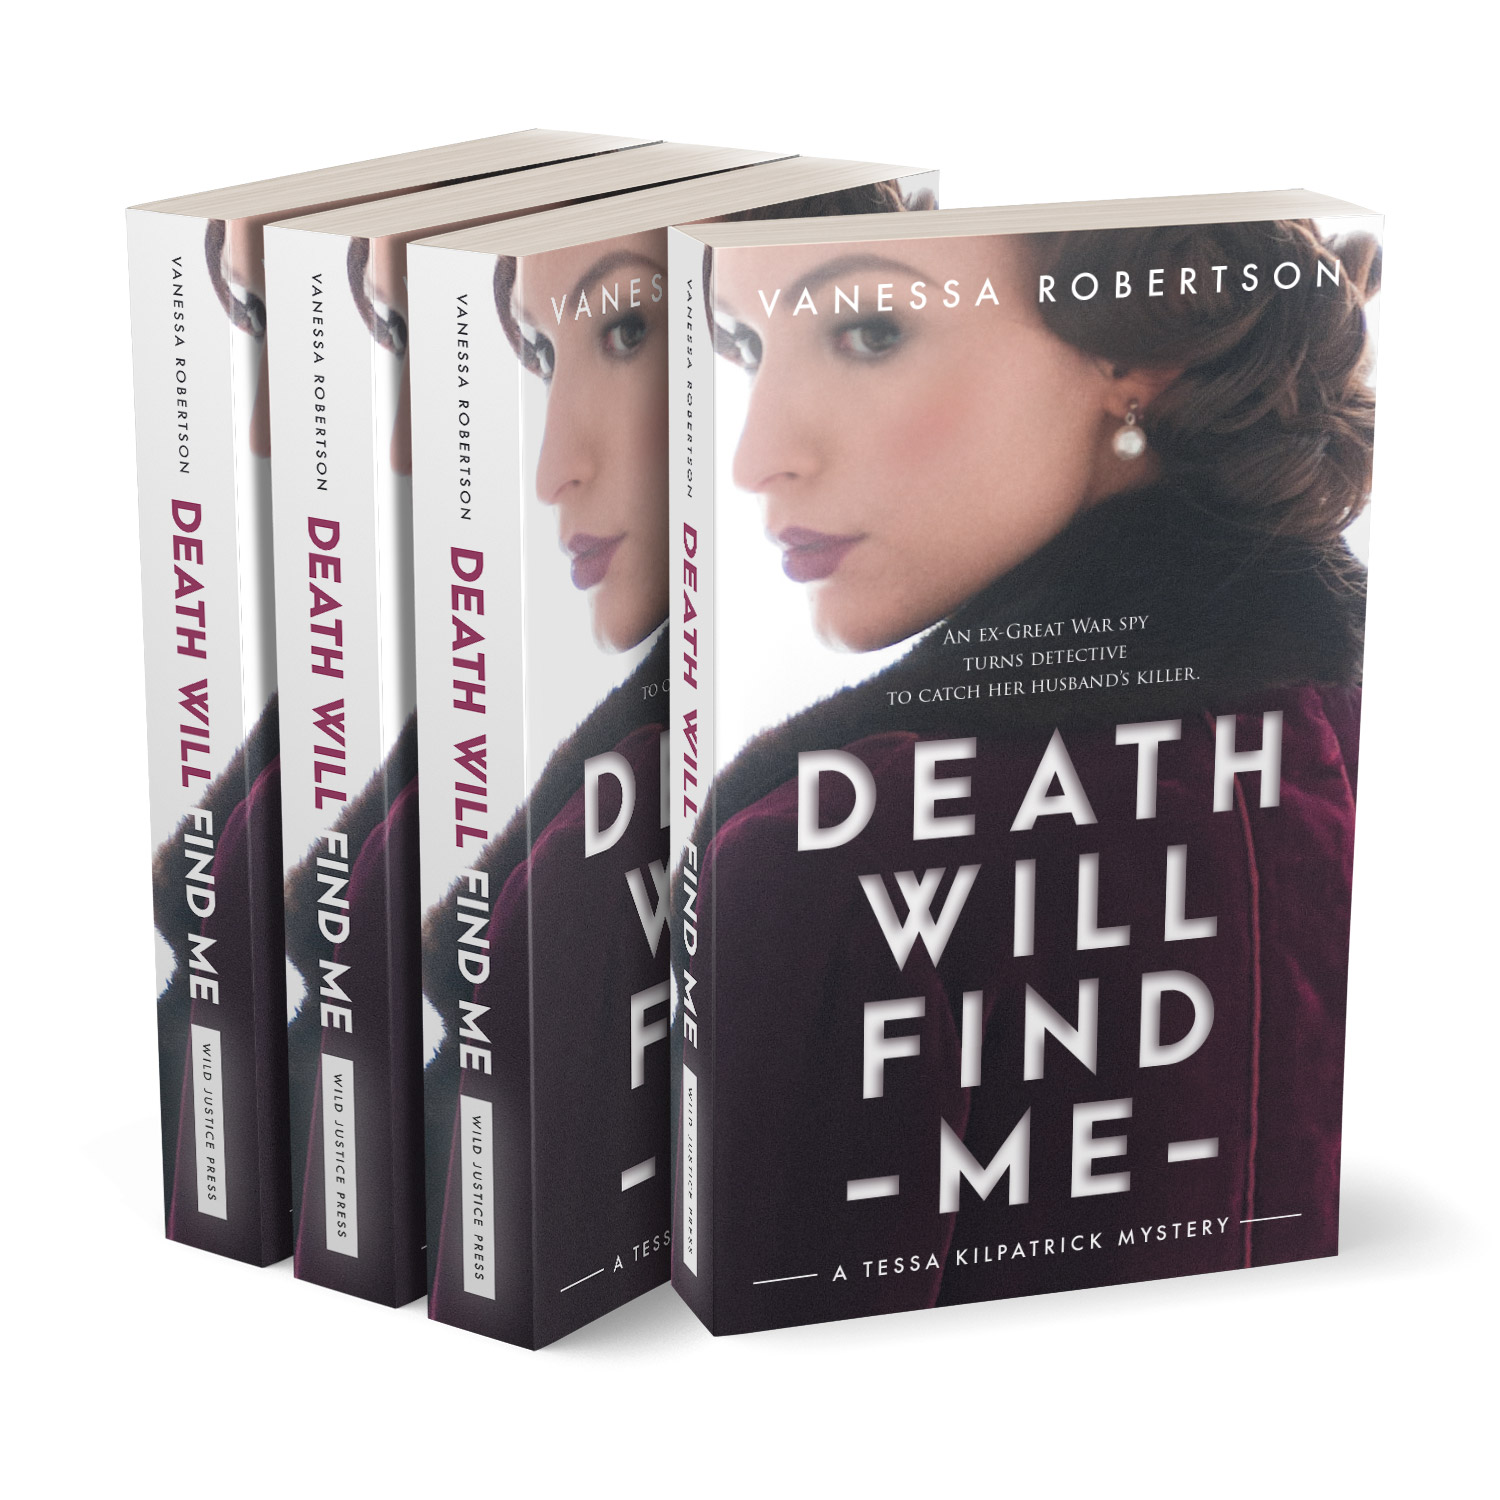 'Death Will Find Me' is a female-centric, between-the-wars mystery thriller. The author is Vanessa Robertson. The book cover design and interior formatting are by Mark Thomas. To learn more about what Mark could do for your book, please visit coverness.com.